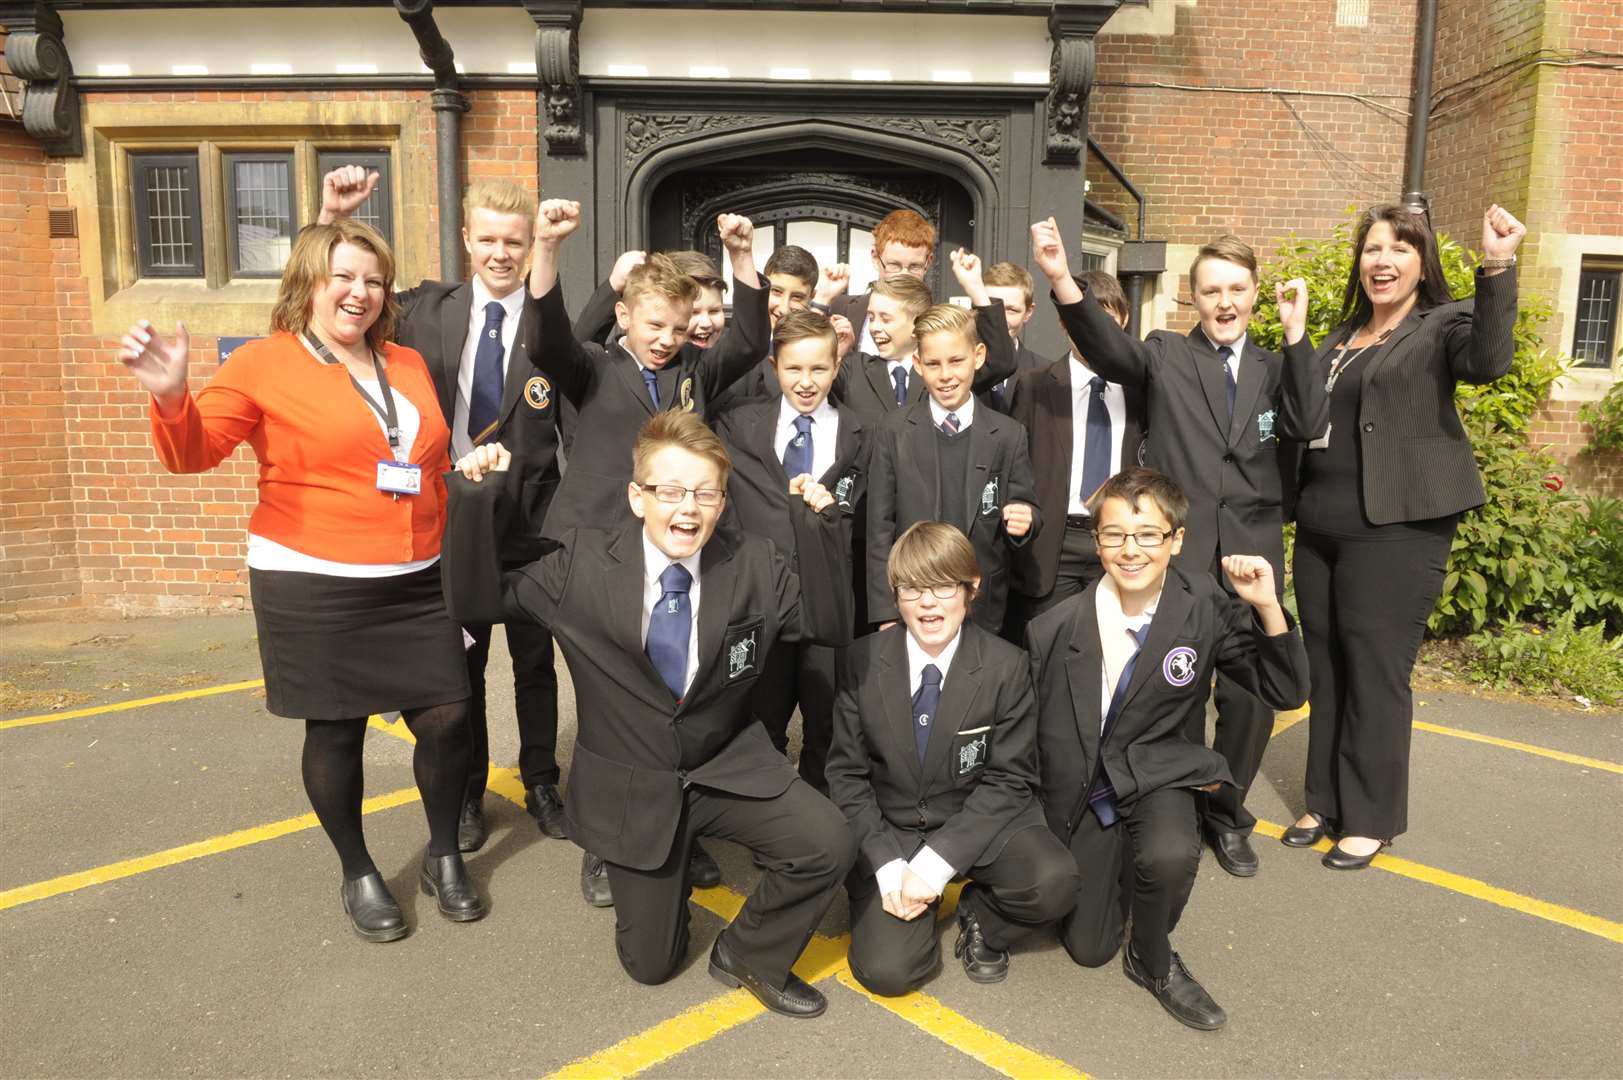 Winners of the What's On competition: students from Chatham Grammar School for Boys